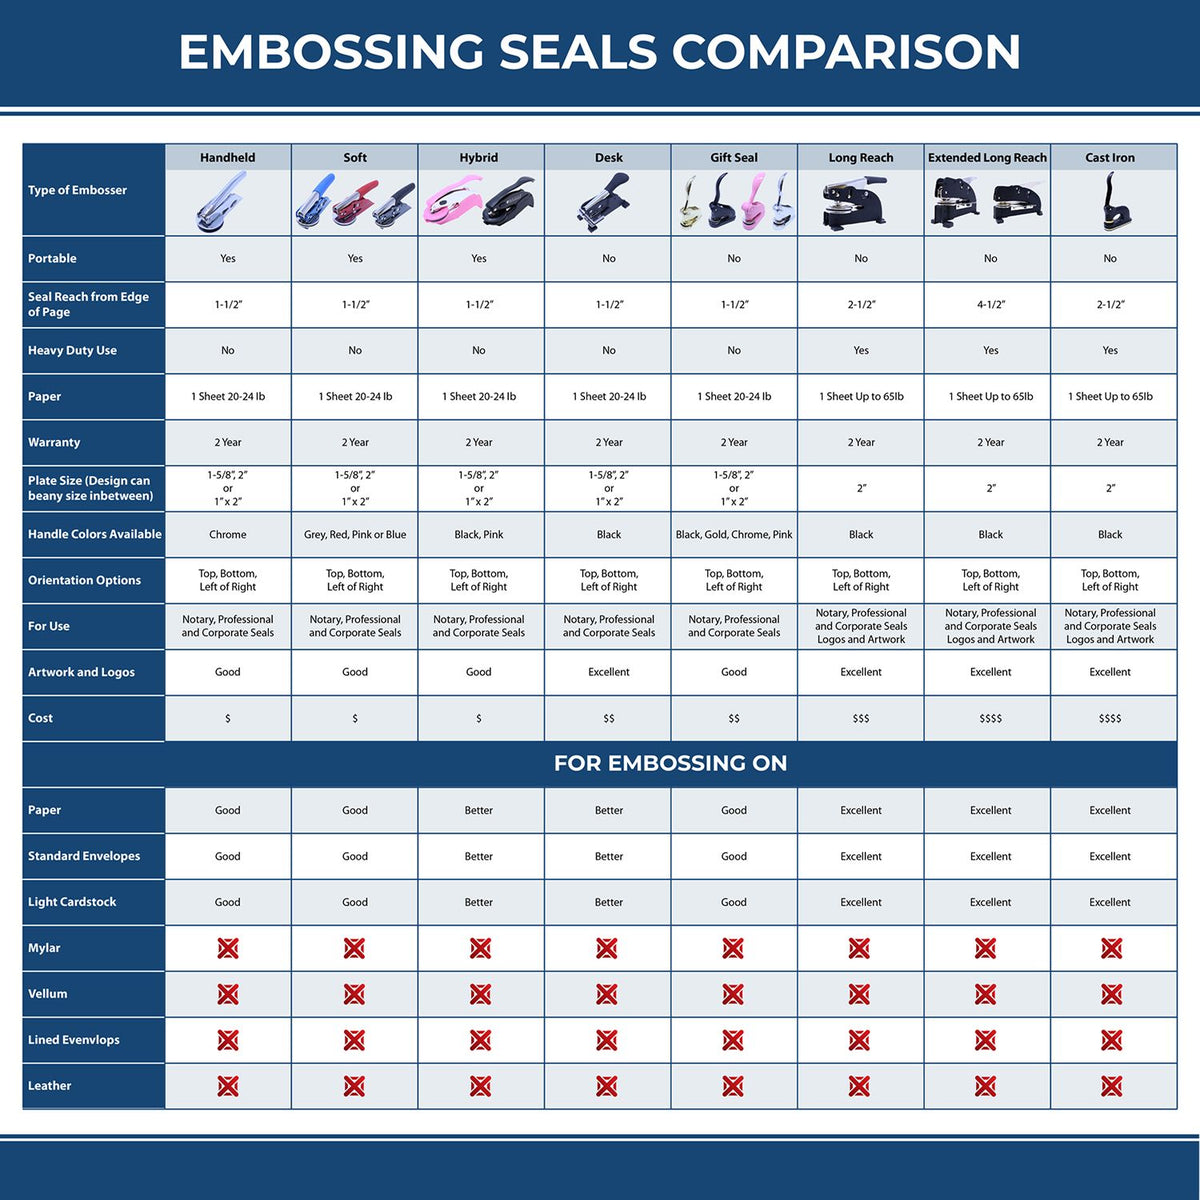 A comparison chart for the different types of mount models available for the Delaware Desk Surveyor Seal Embosser.